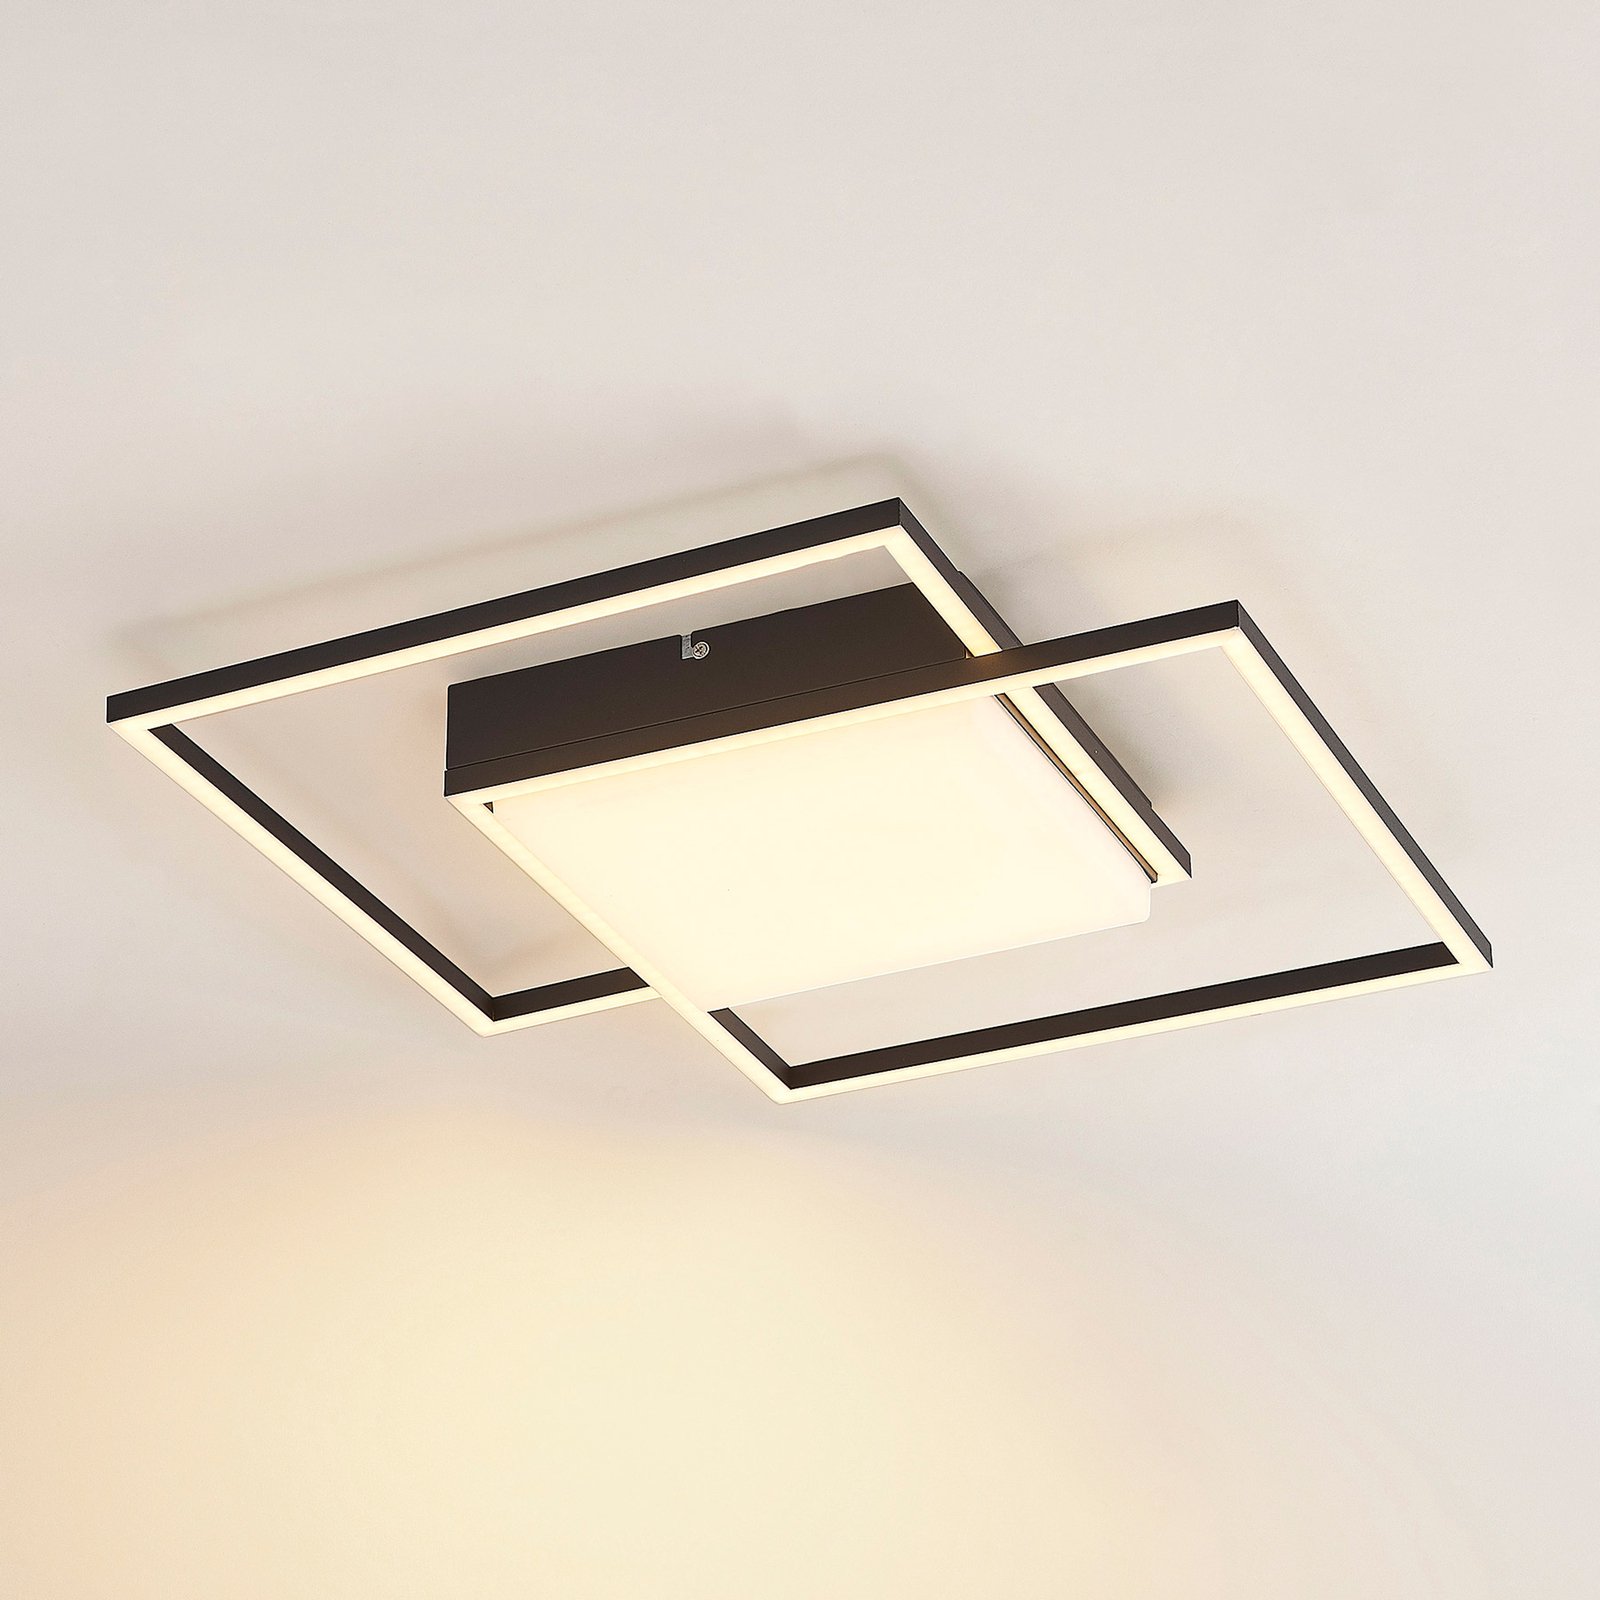 Lindby Zayd LED ceiling light, black, dimmable